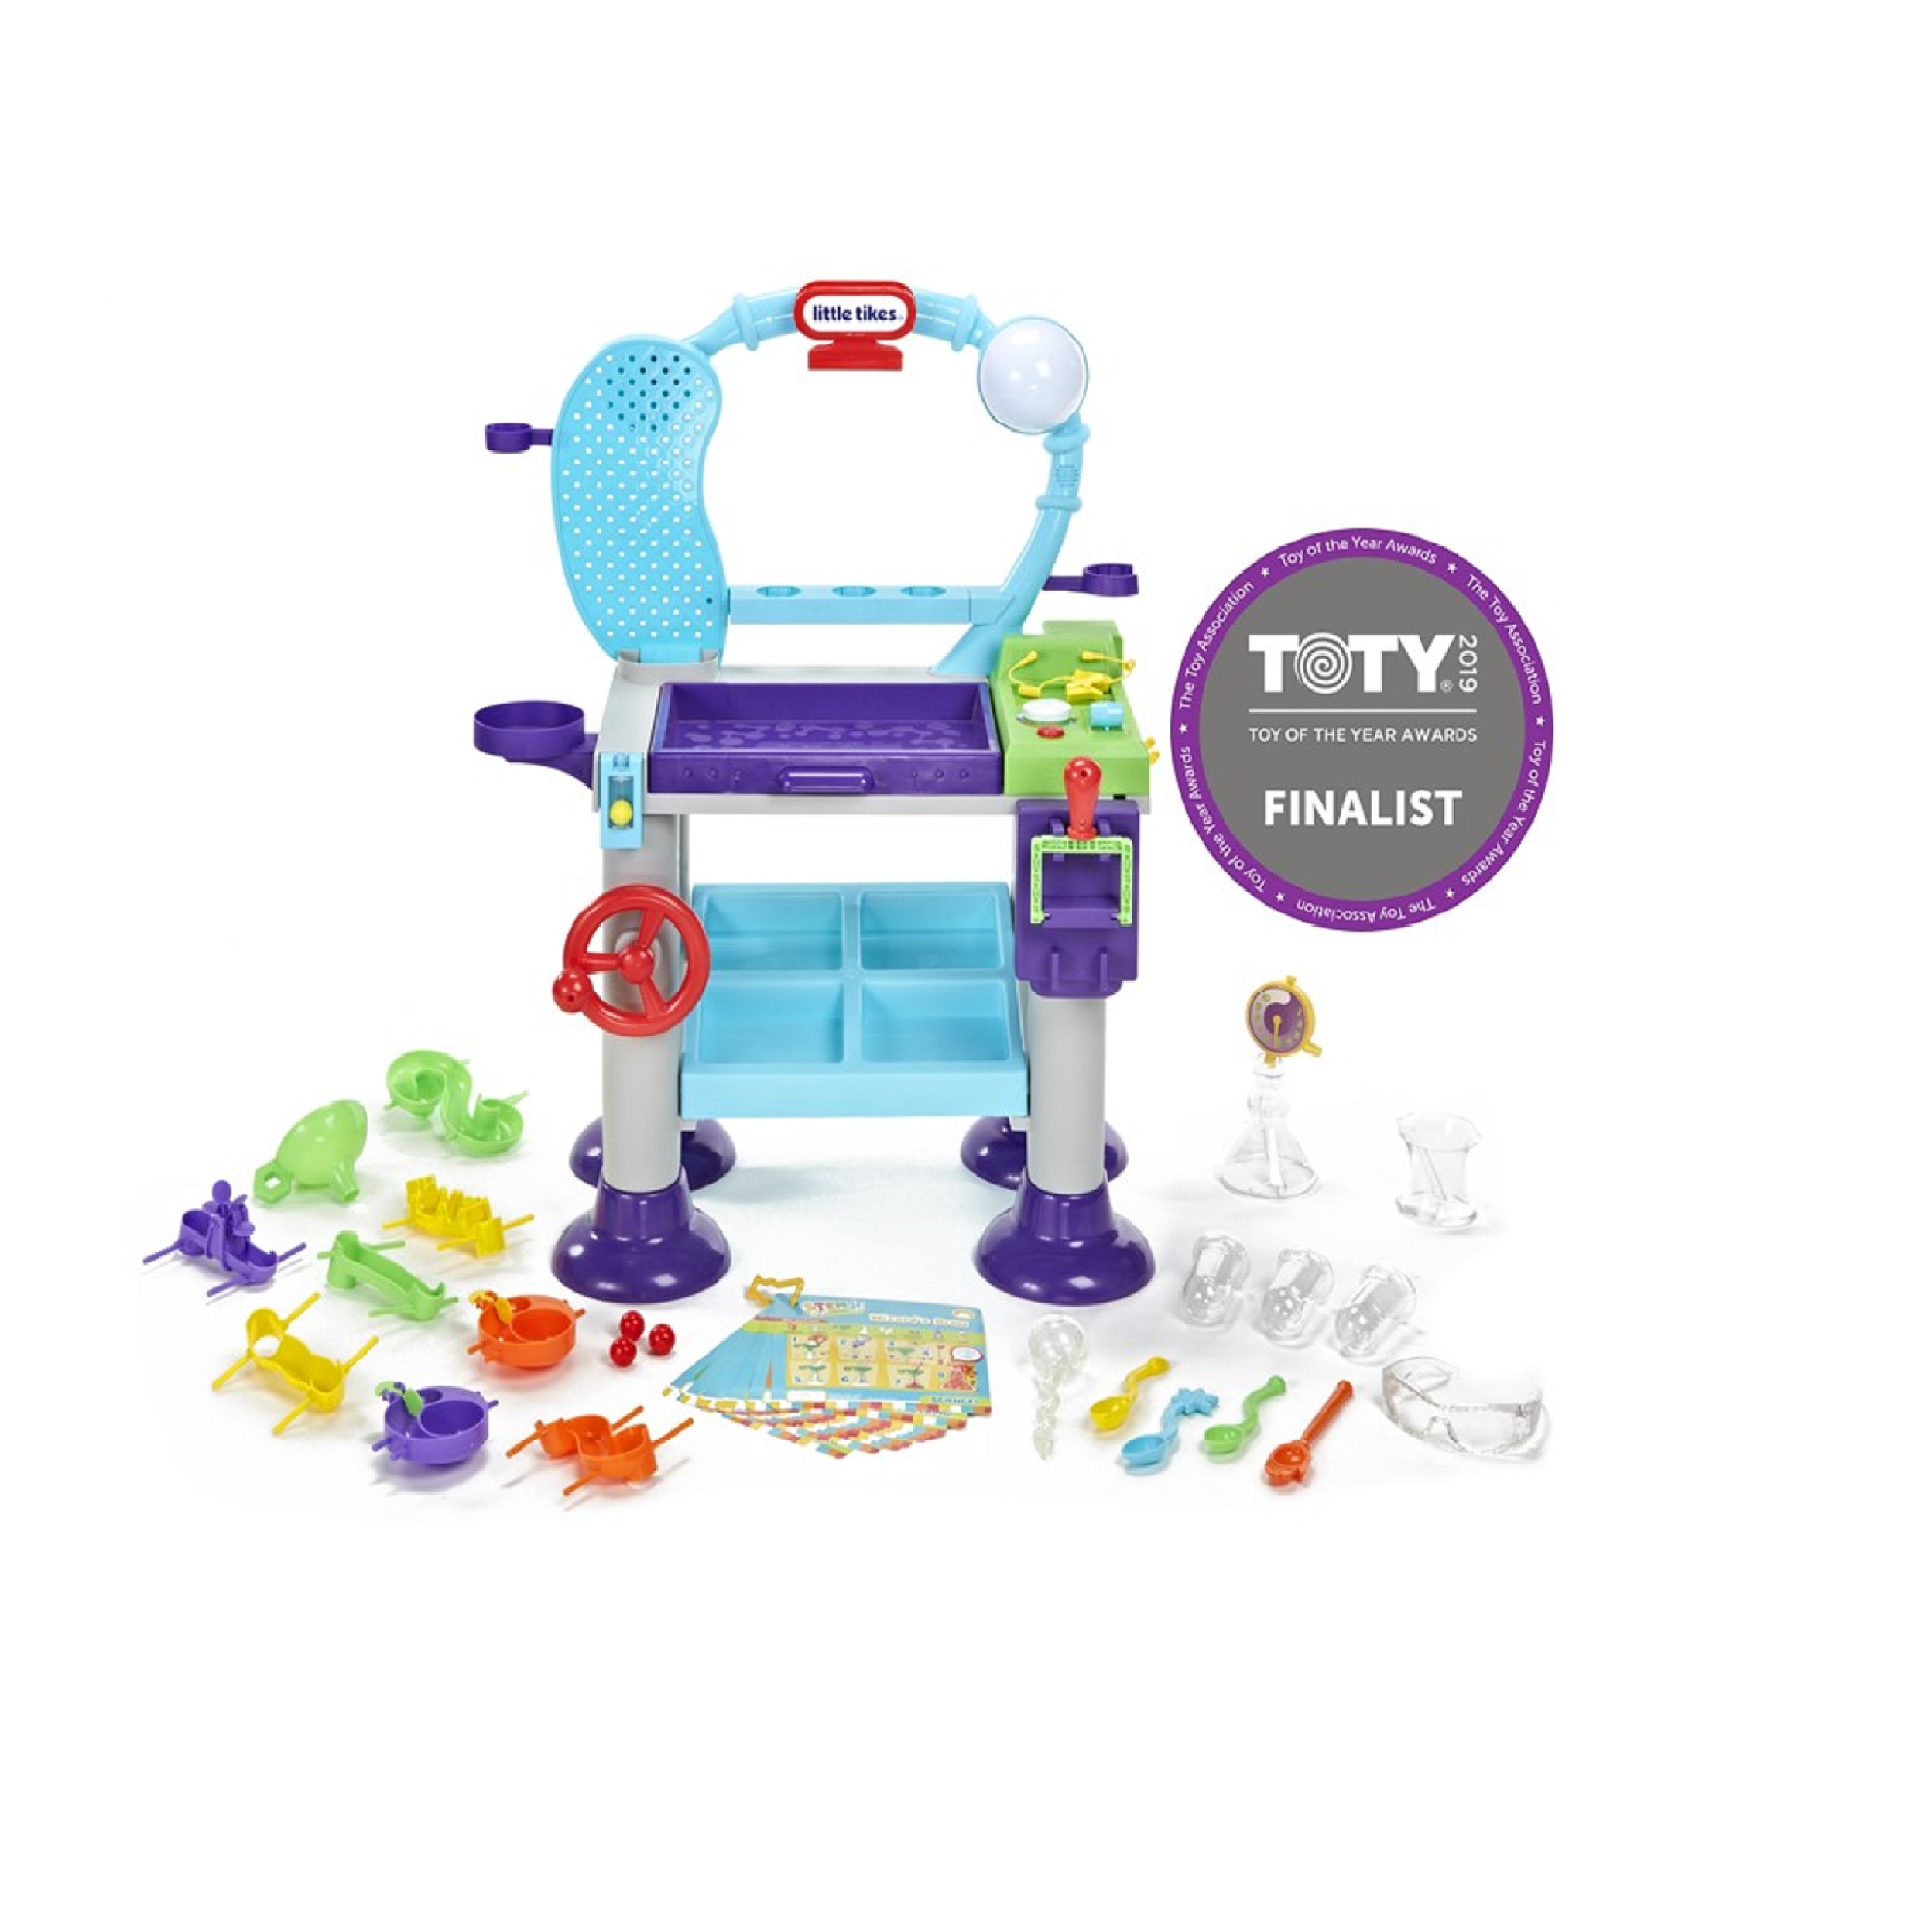 Little Tikes STEM Jr. Wonder Lab Toy with Experiments for Kids - image 3 of 8